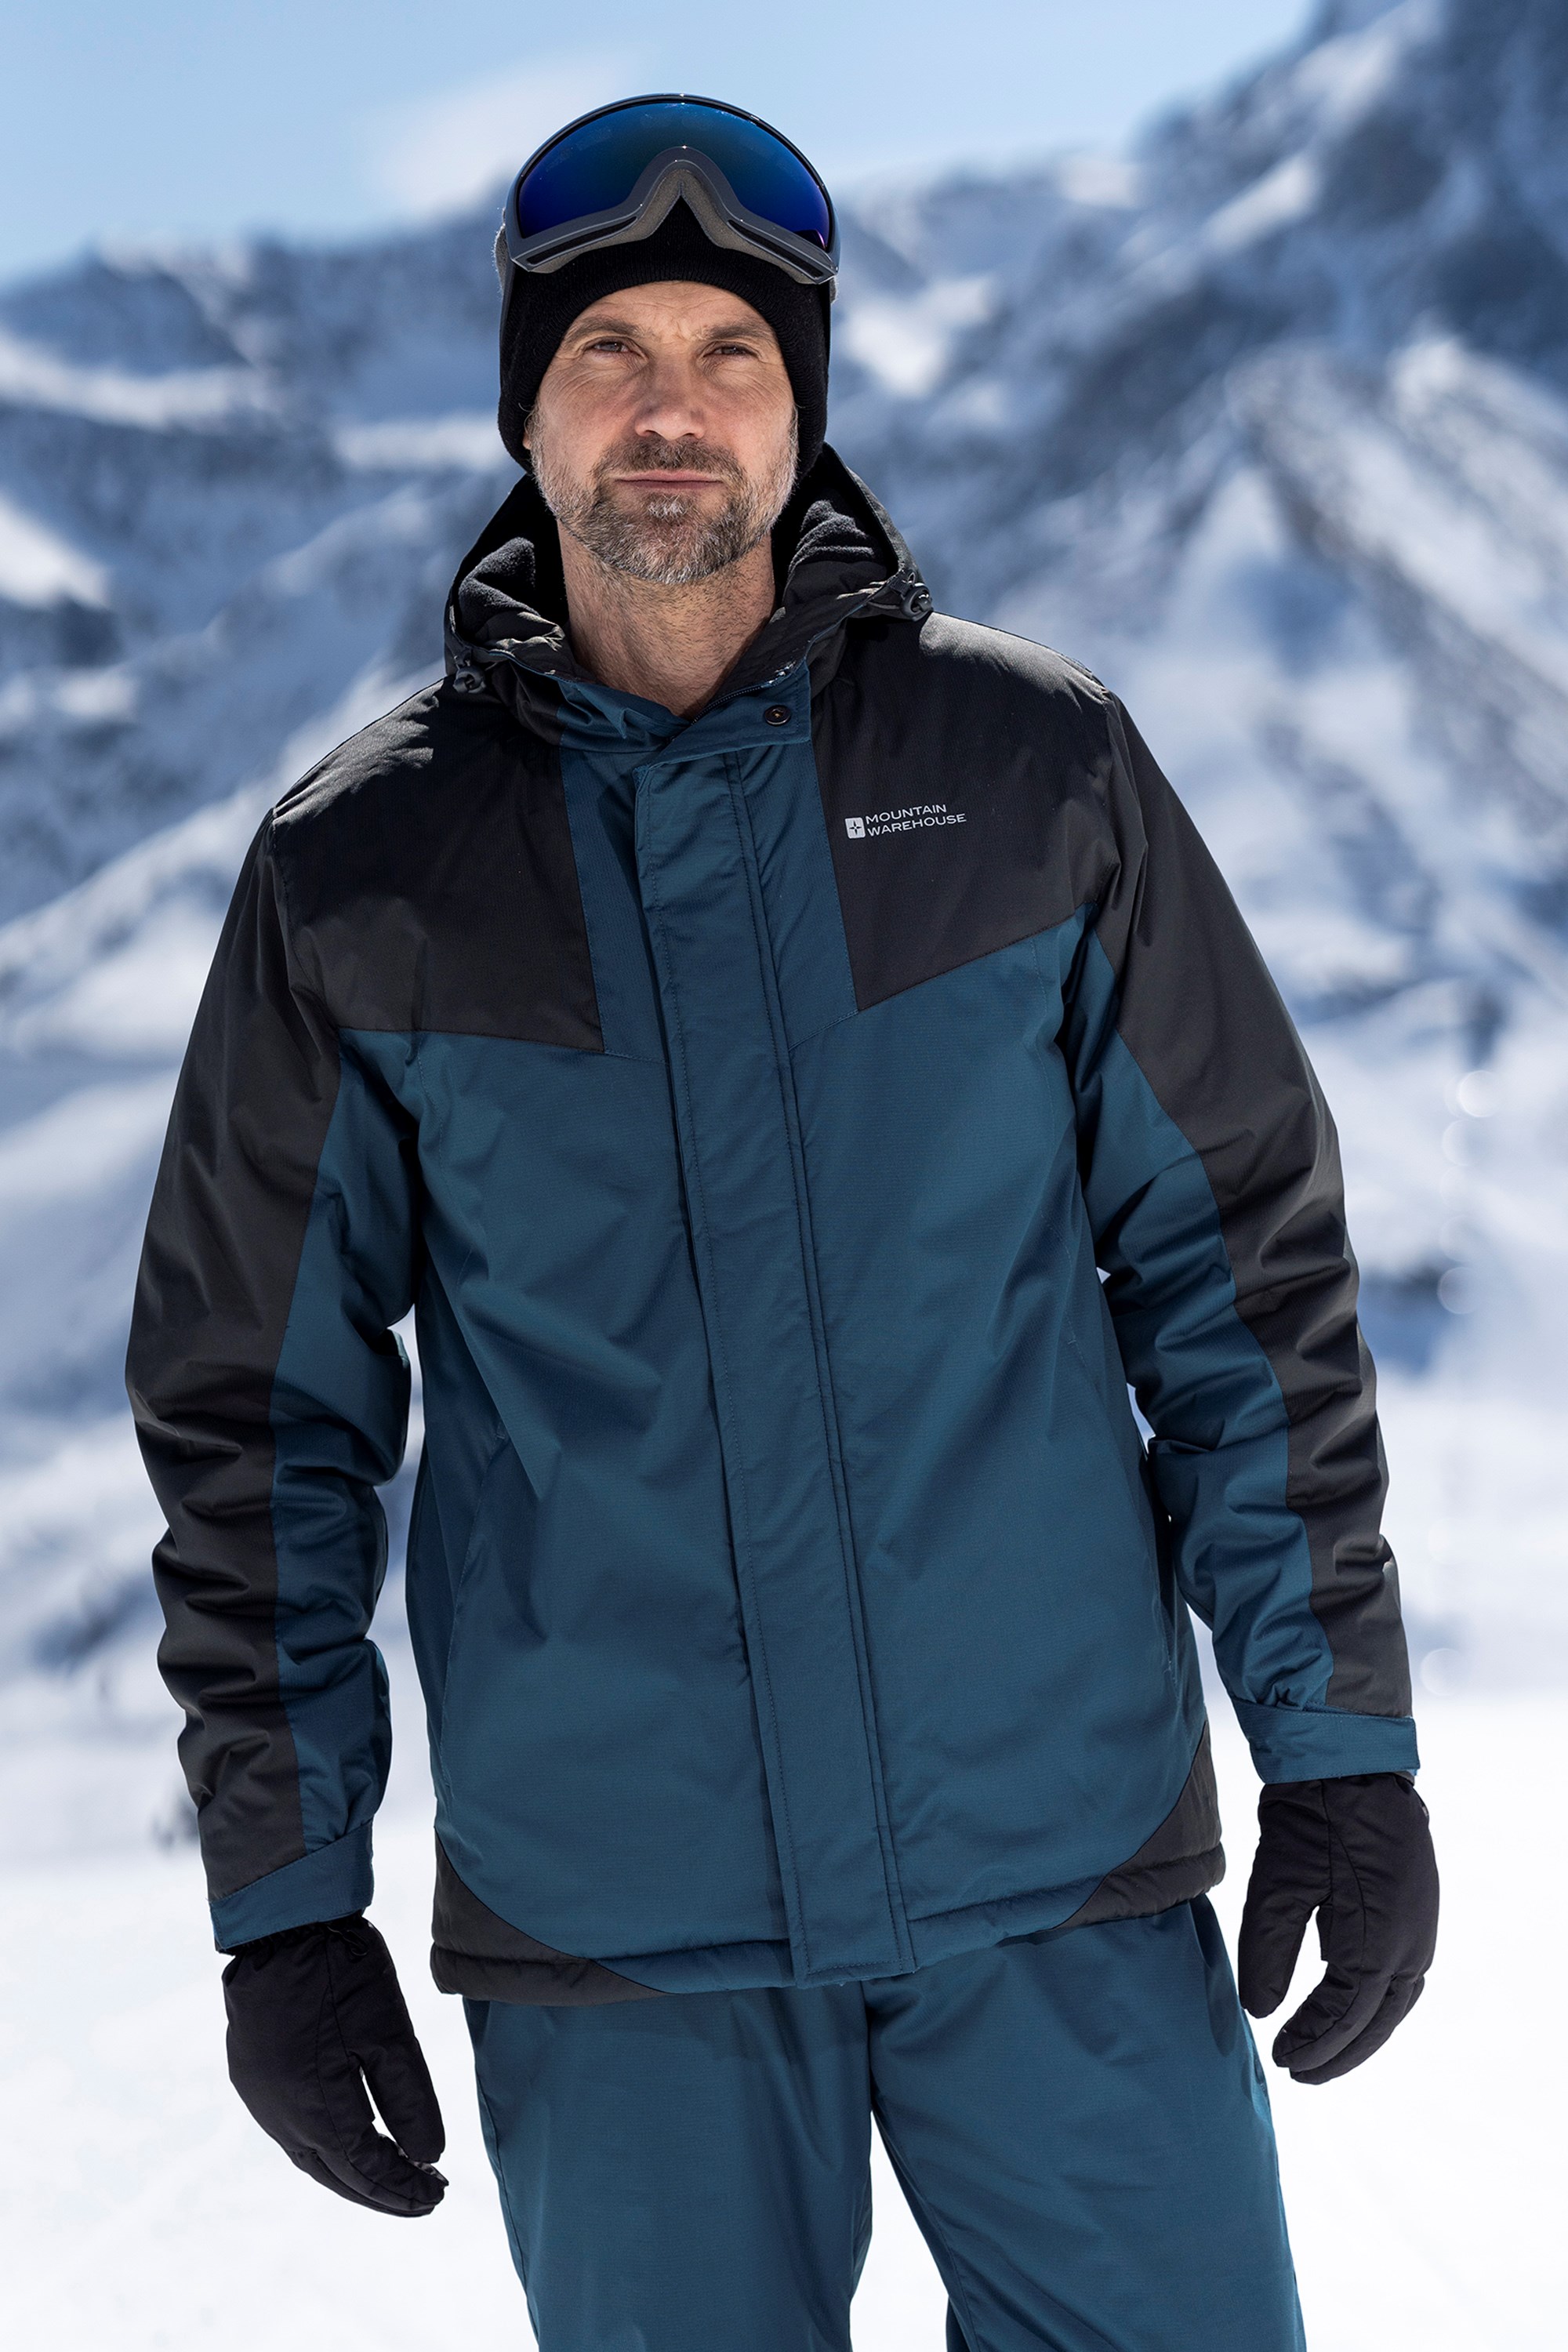 Aggregate more than 82 mens ski jackets and pants latest - in.eteachers